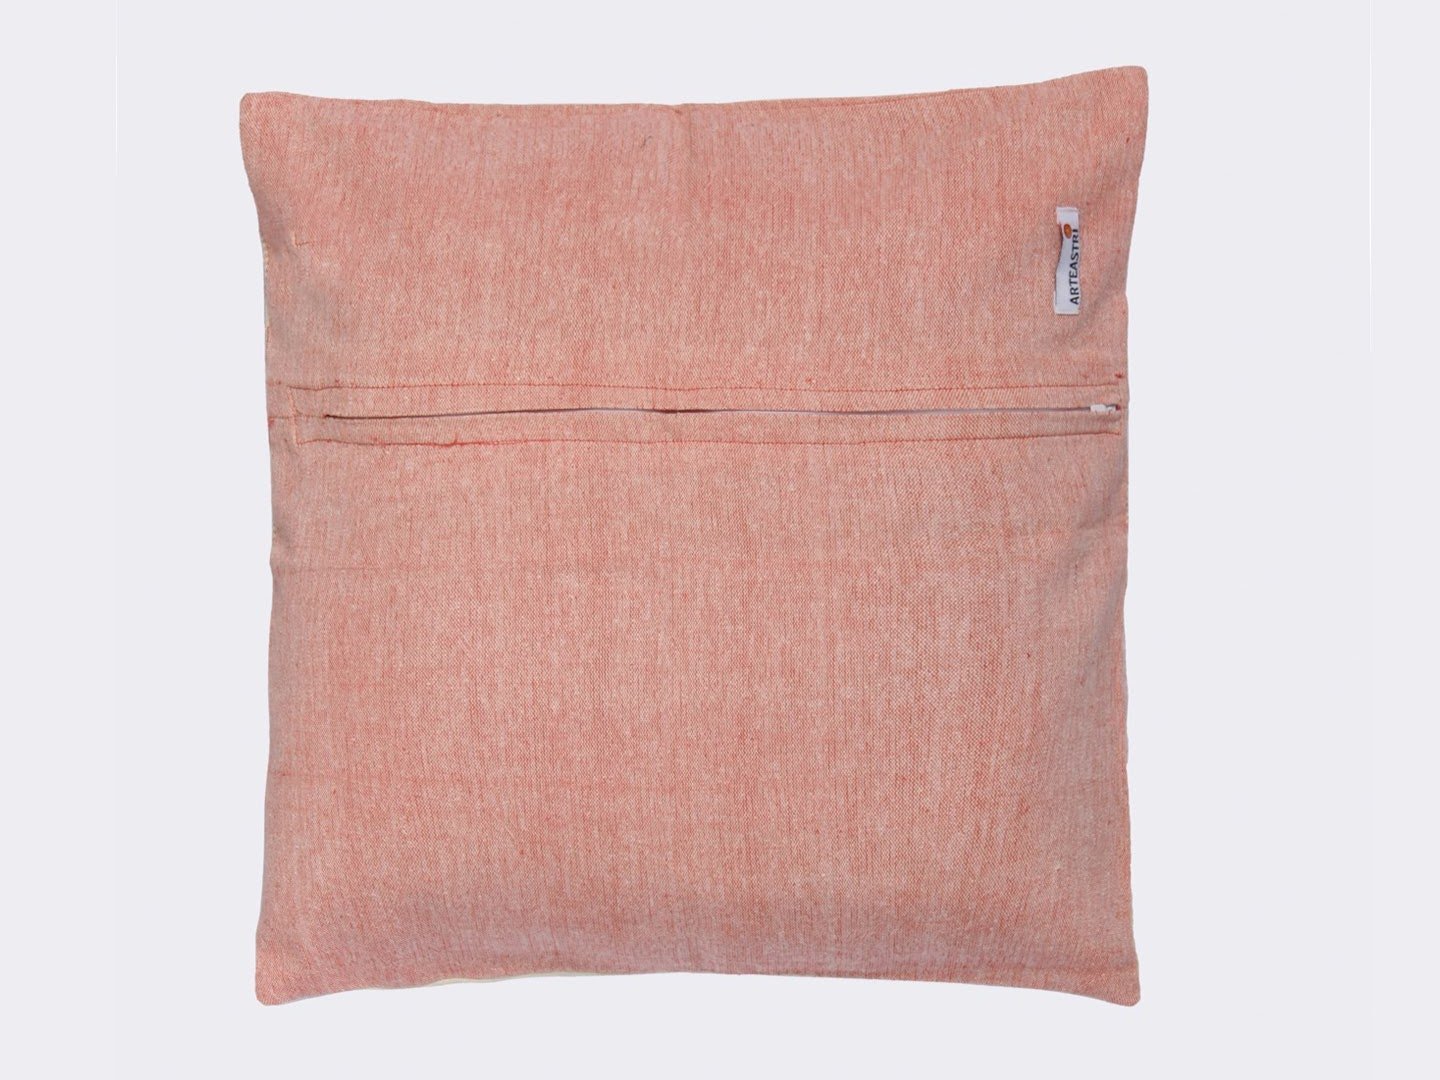 Handcrafted Pink Chevron Cotton Cushion Covers - Arteastri